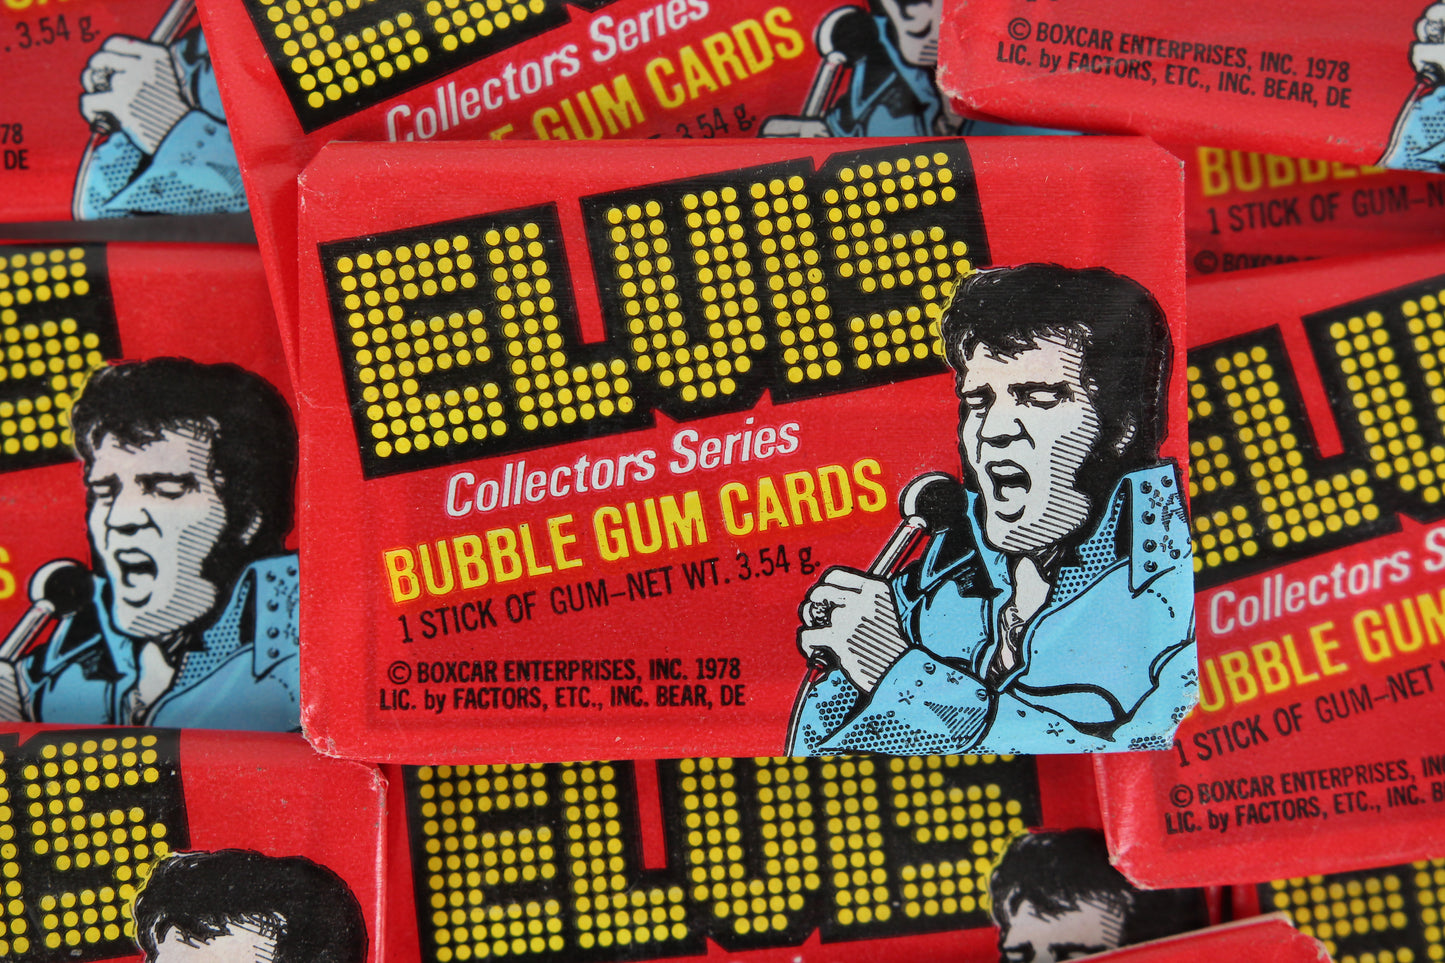 Elvis Collectors Series Collectible Trading Cards, One Wax Pack, 1978